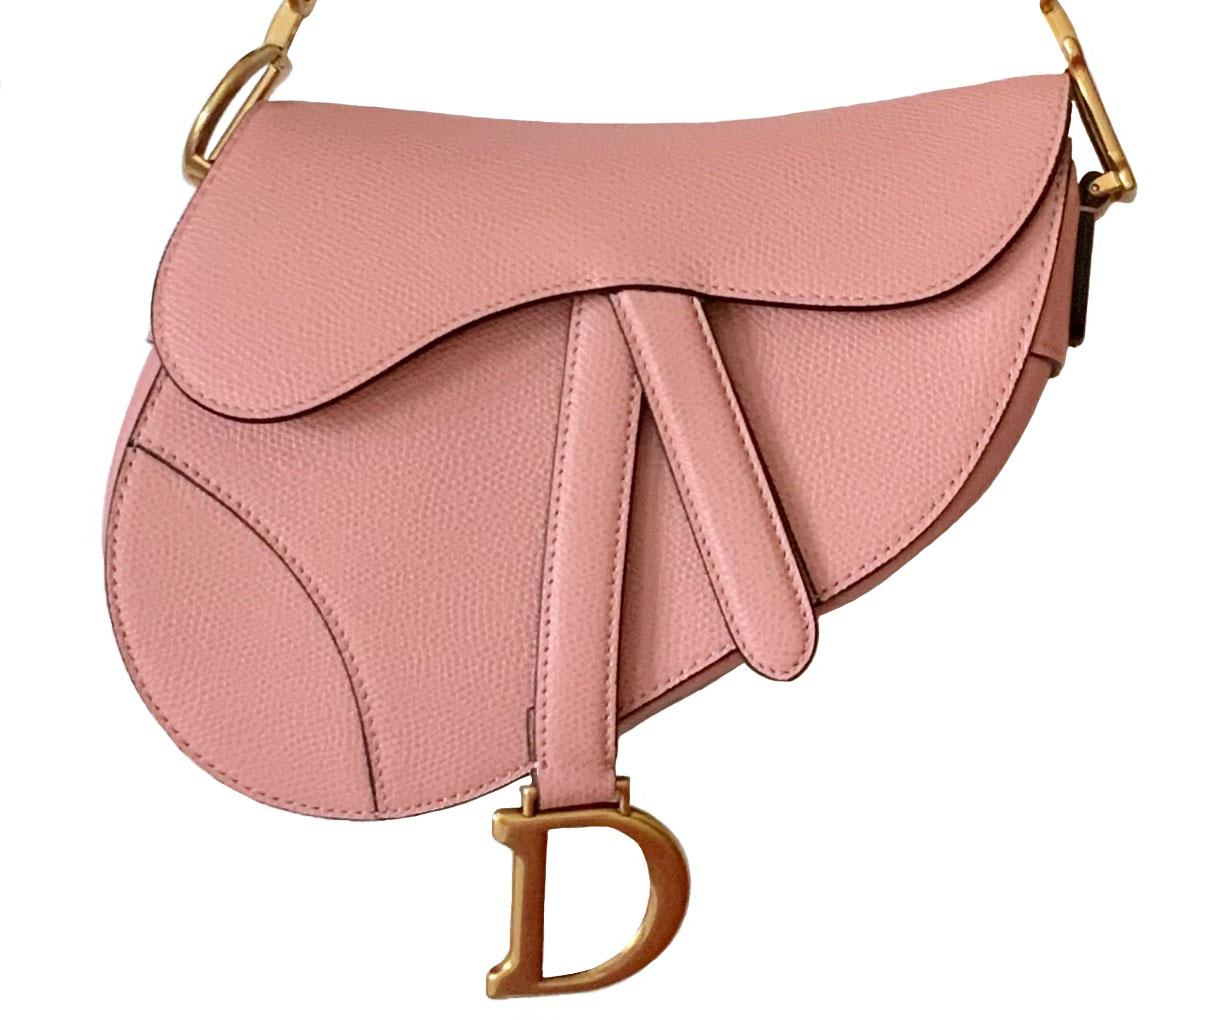 This pre-owned Mini Saddle bag from Christian Dior is crafted in a nude-pink embossed grained calfskin.
Its jewellery is realized in an aged gold-tone metal.
It can be carried in the hand or on the shoulder.
   
Year: 12/2018
Leather: